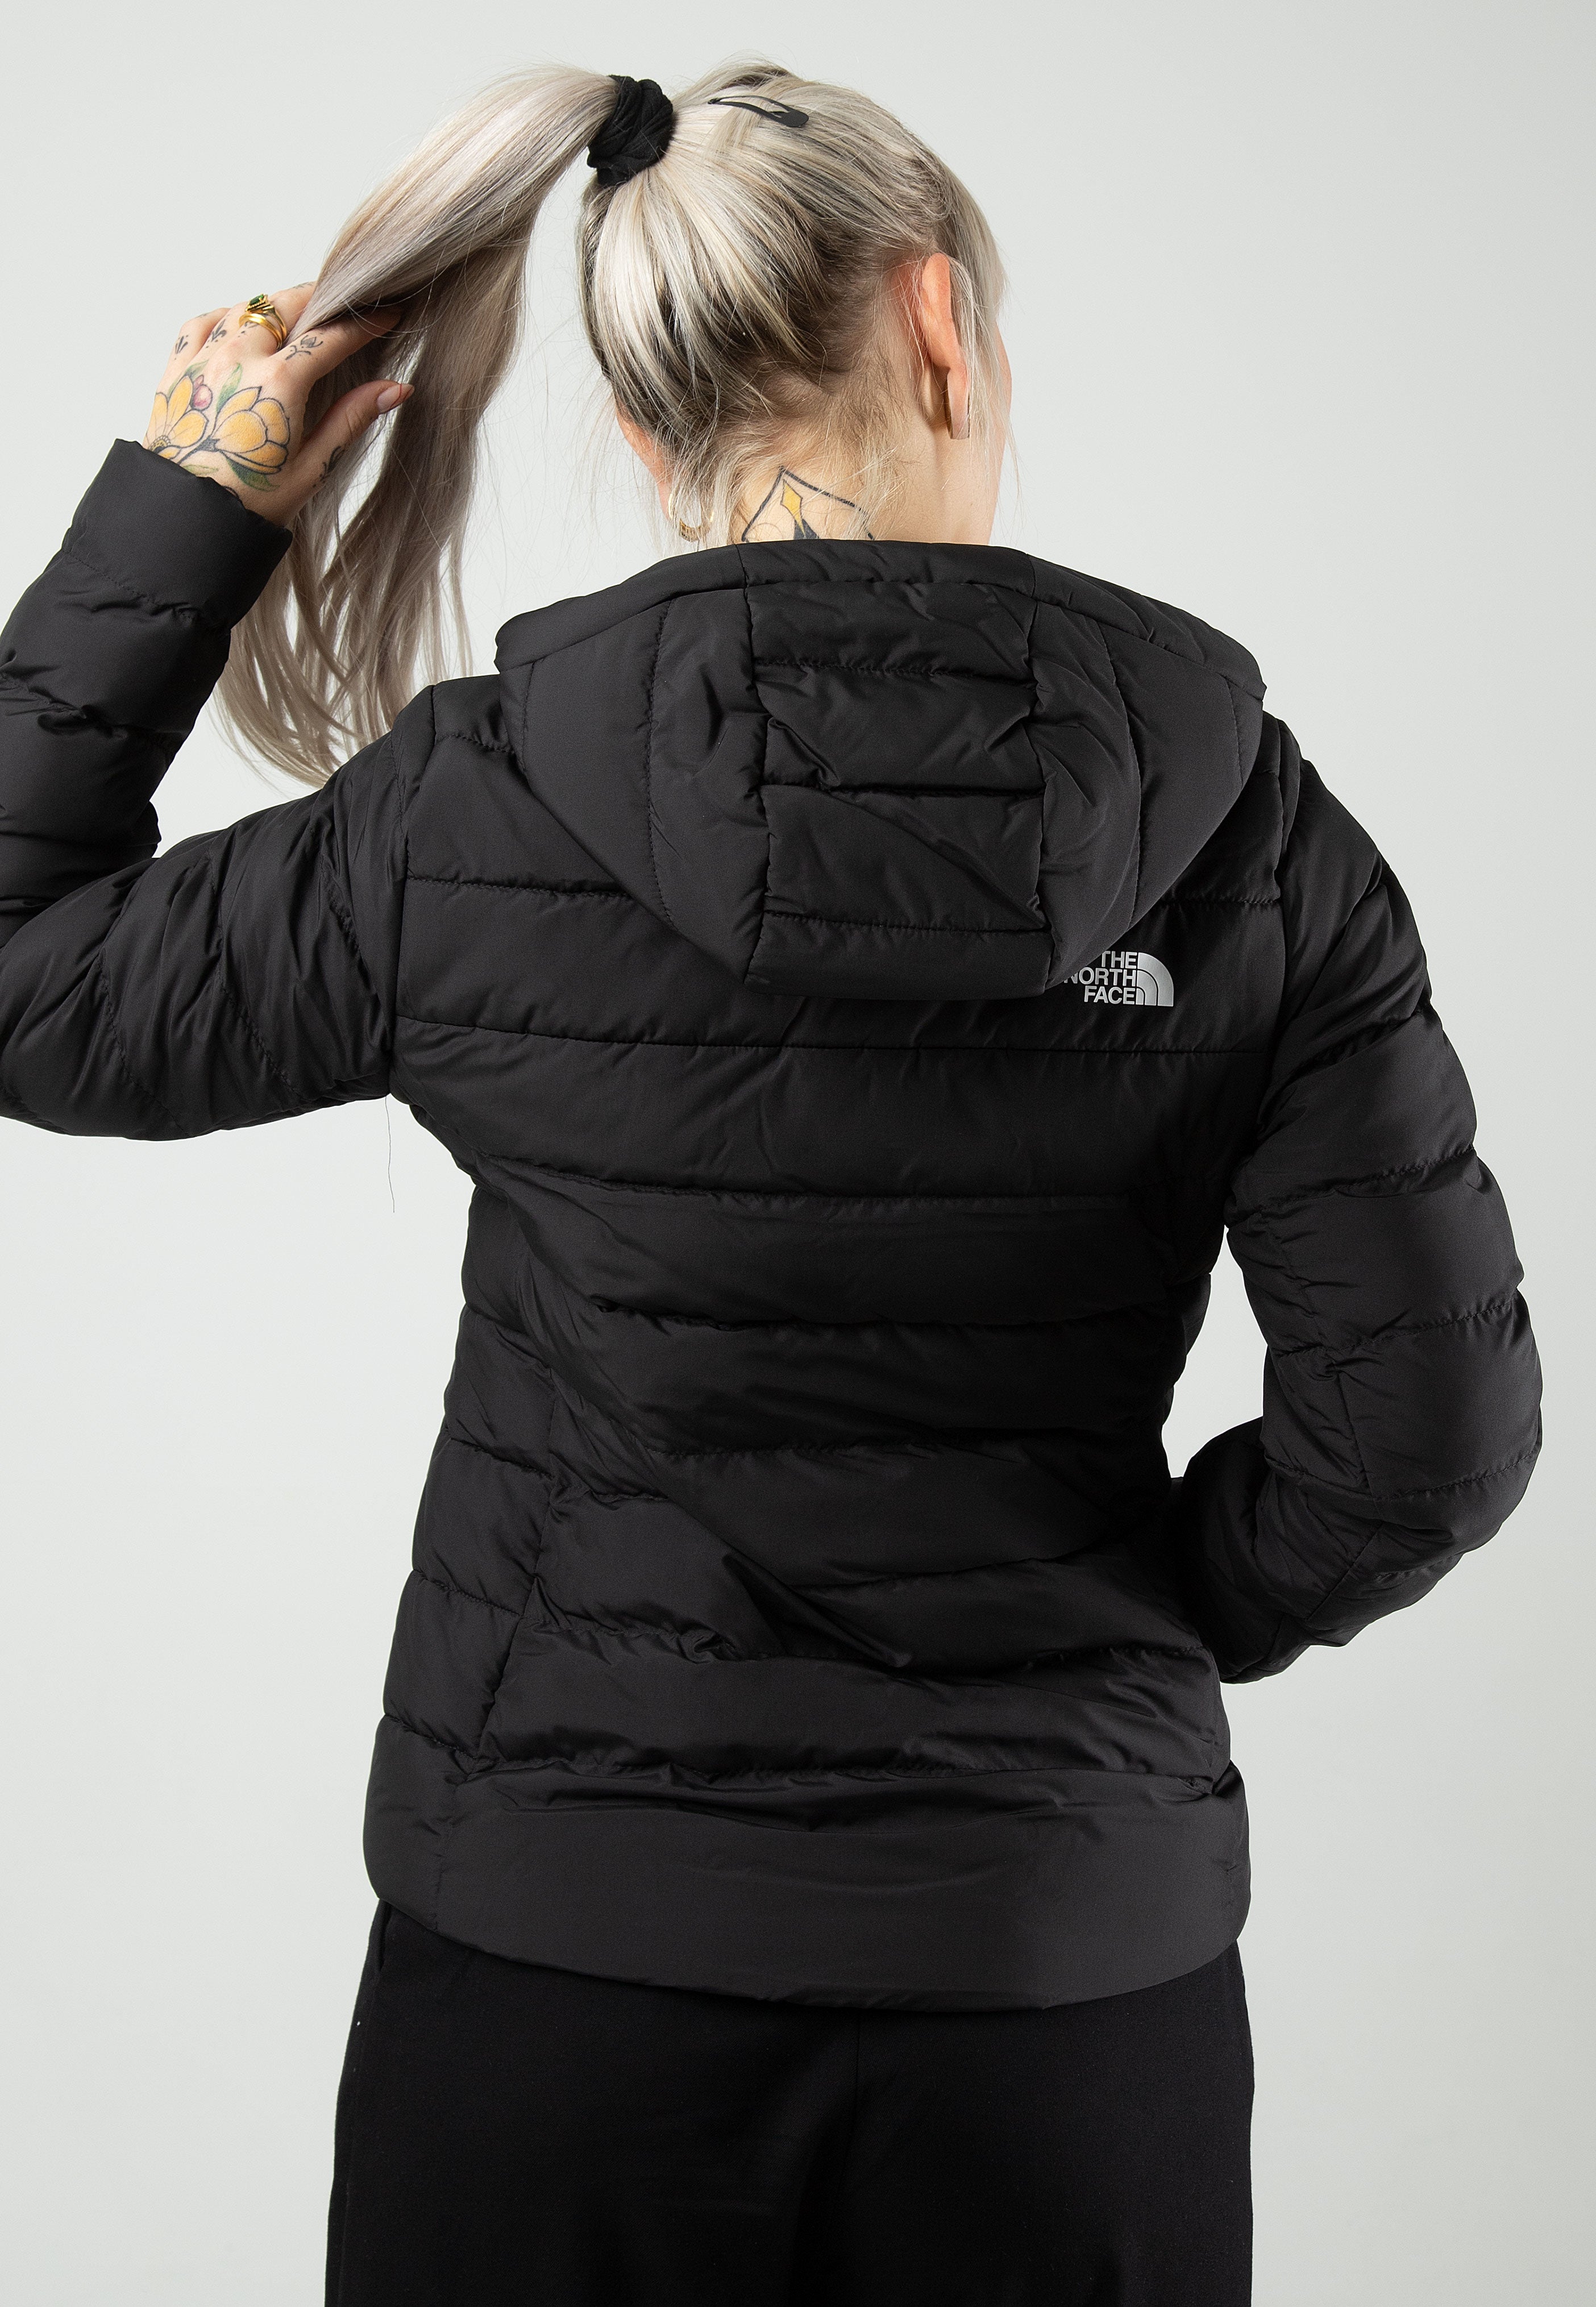 The North Face - Women’s Aconcagua 3 Hooded Tnf Black - Jacket